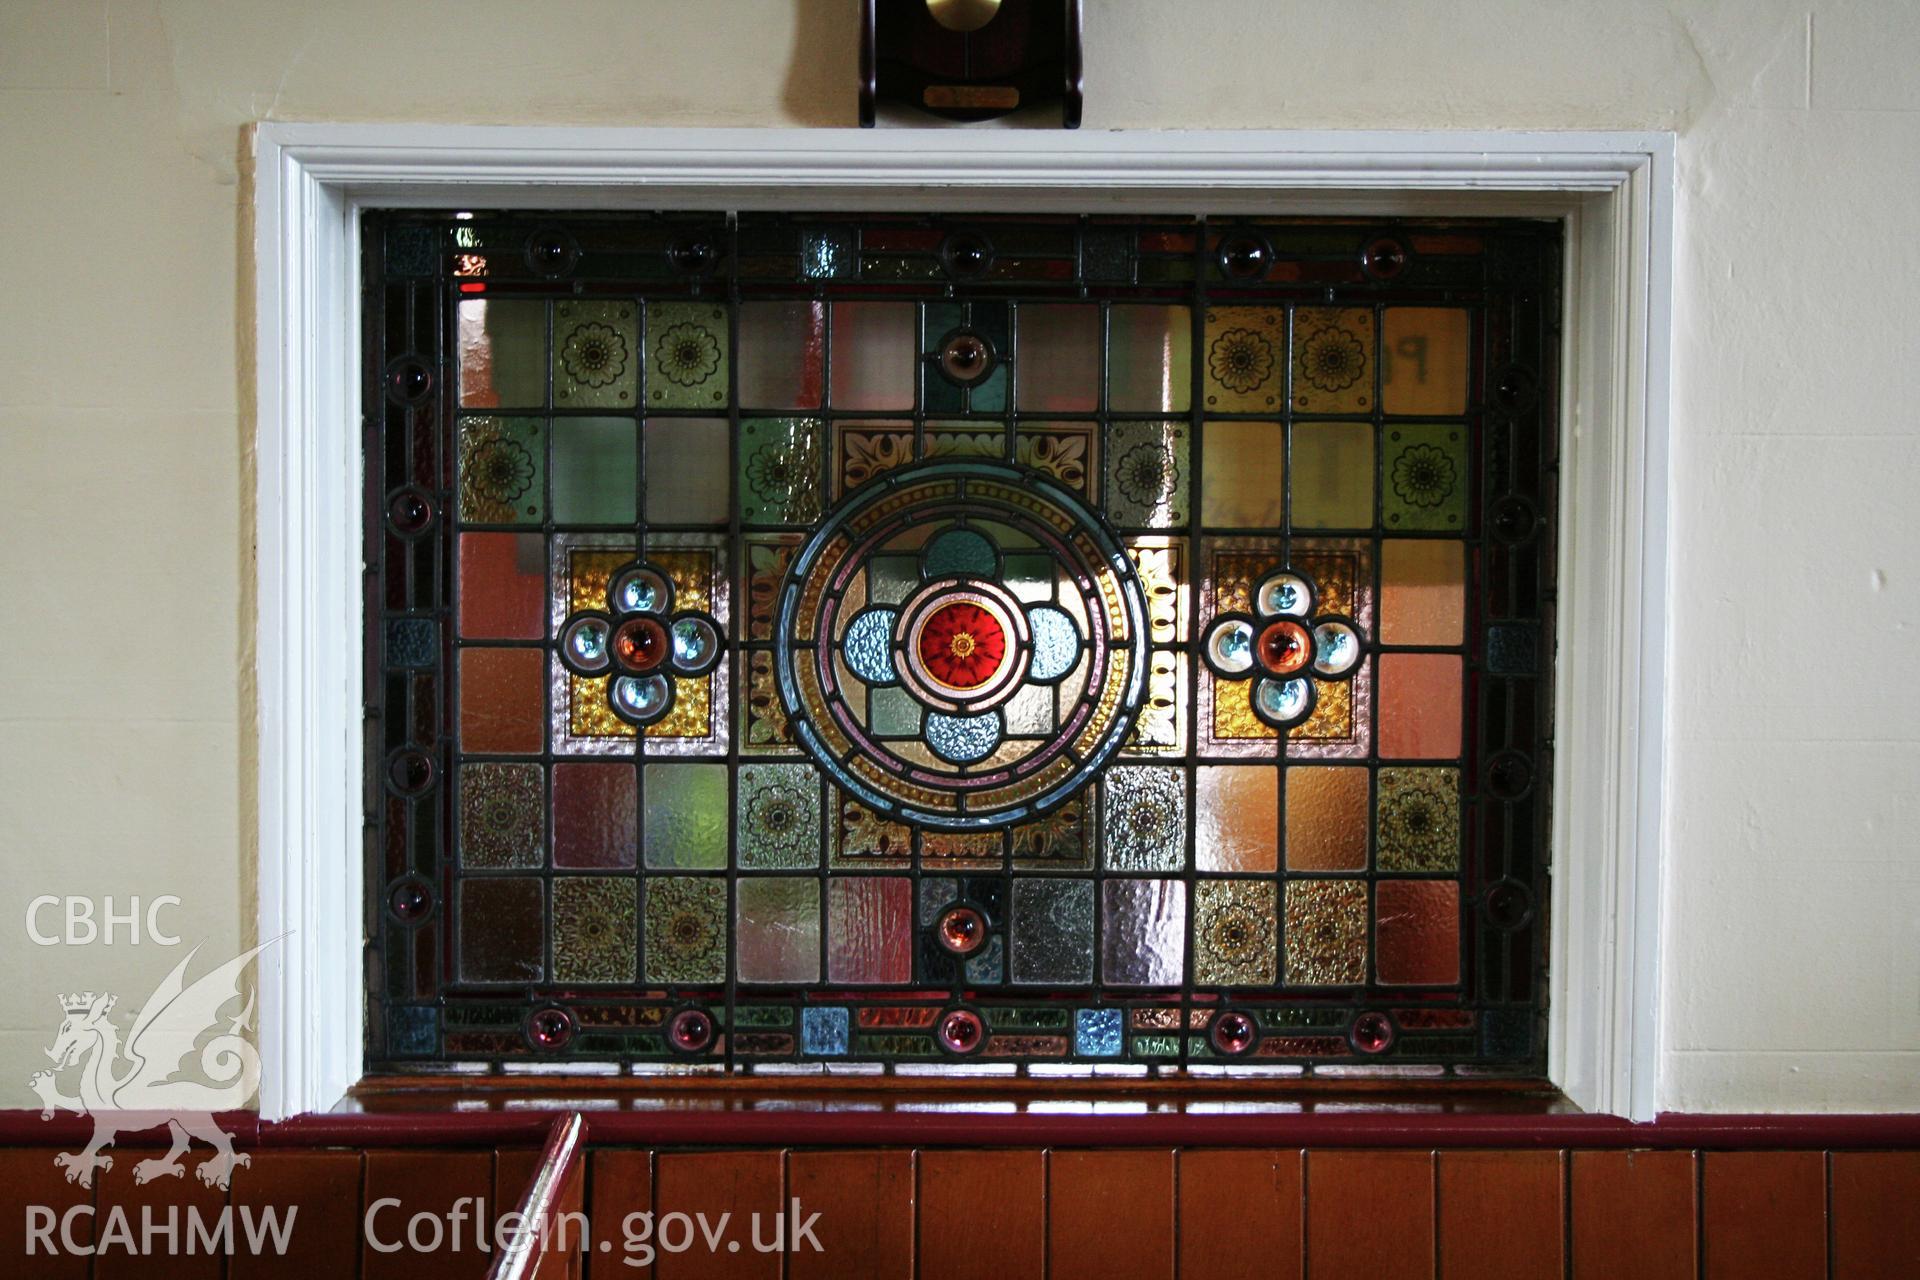 Internal, lobby stained glass detail